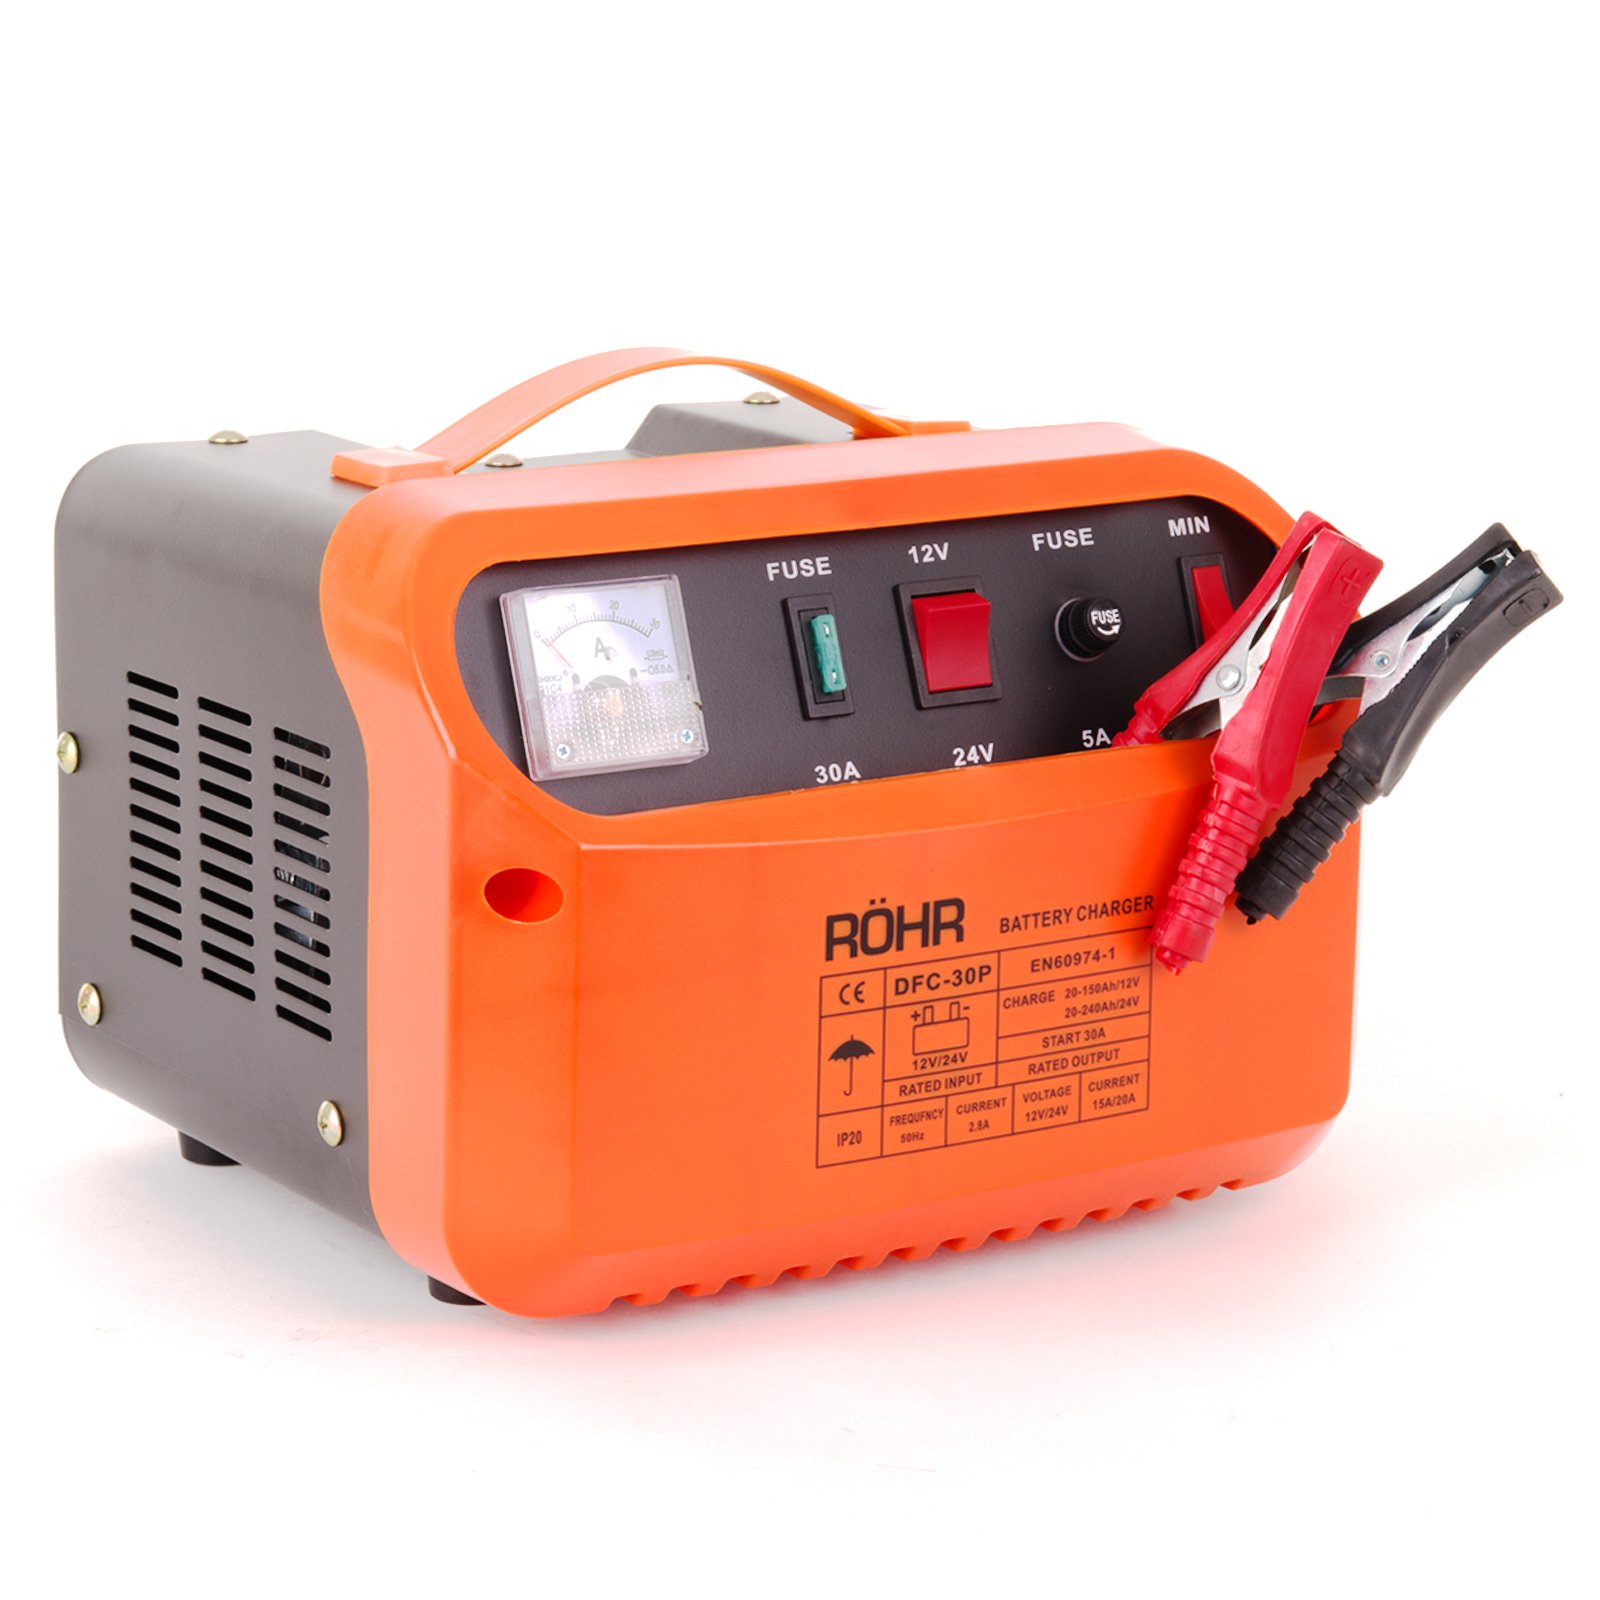 Car Battery Charger ROHR DFC-30P 12V / 24V 20a Portable Trickle / Turbo  Charge with Pulse Repair - 1 Year Warranty